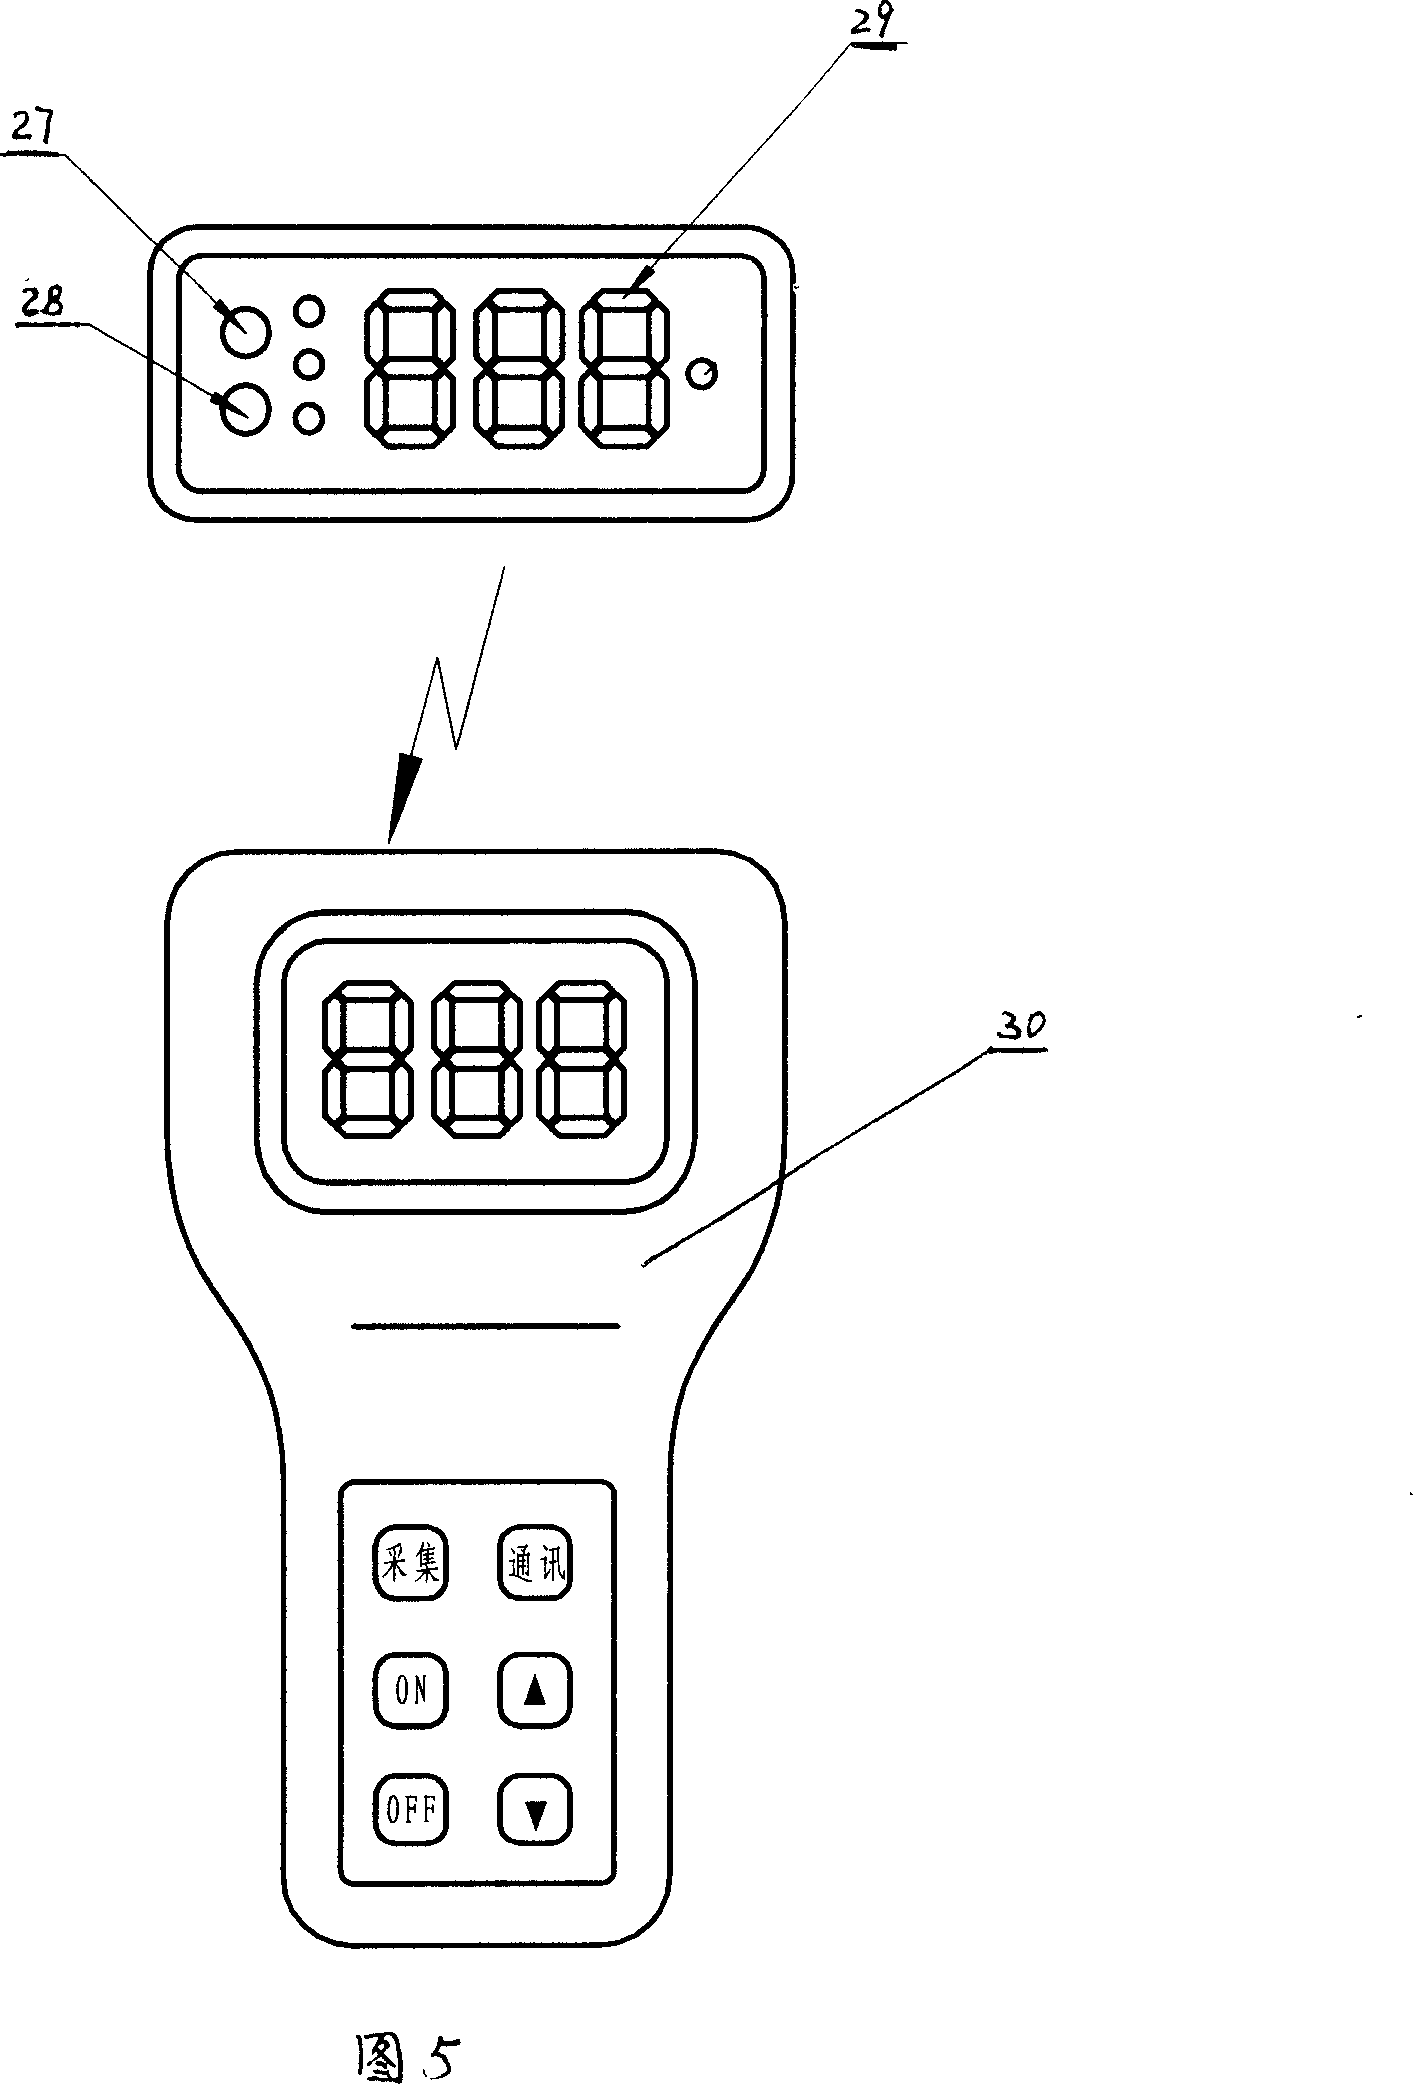 Surrounding rock, bed separation monitor with multiple azimuths and double functions